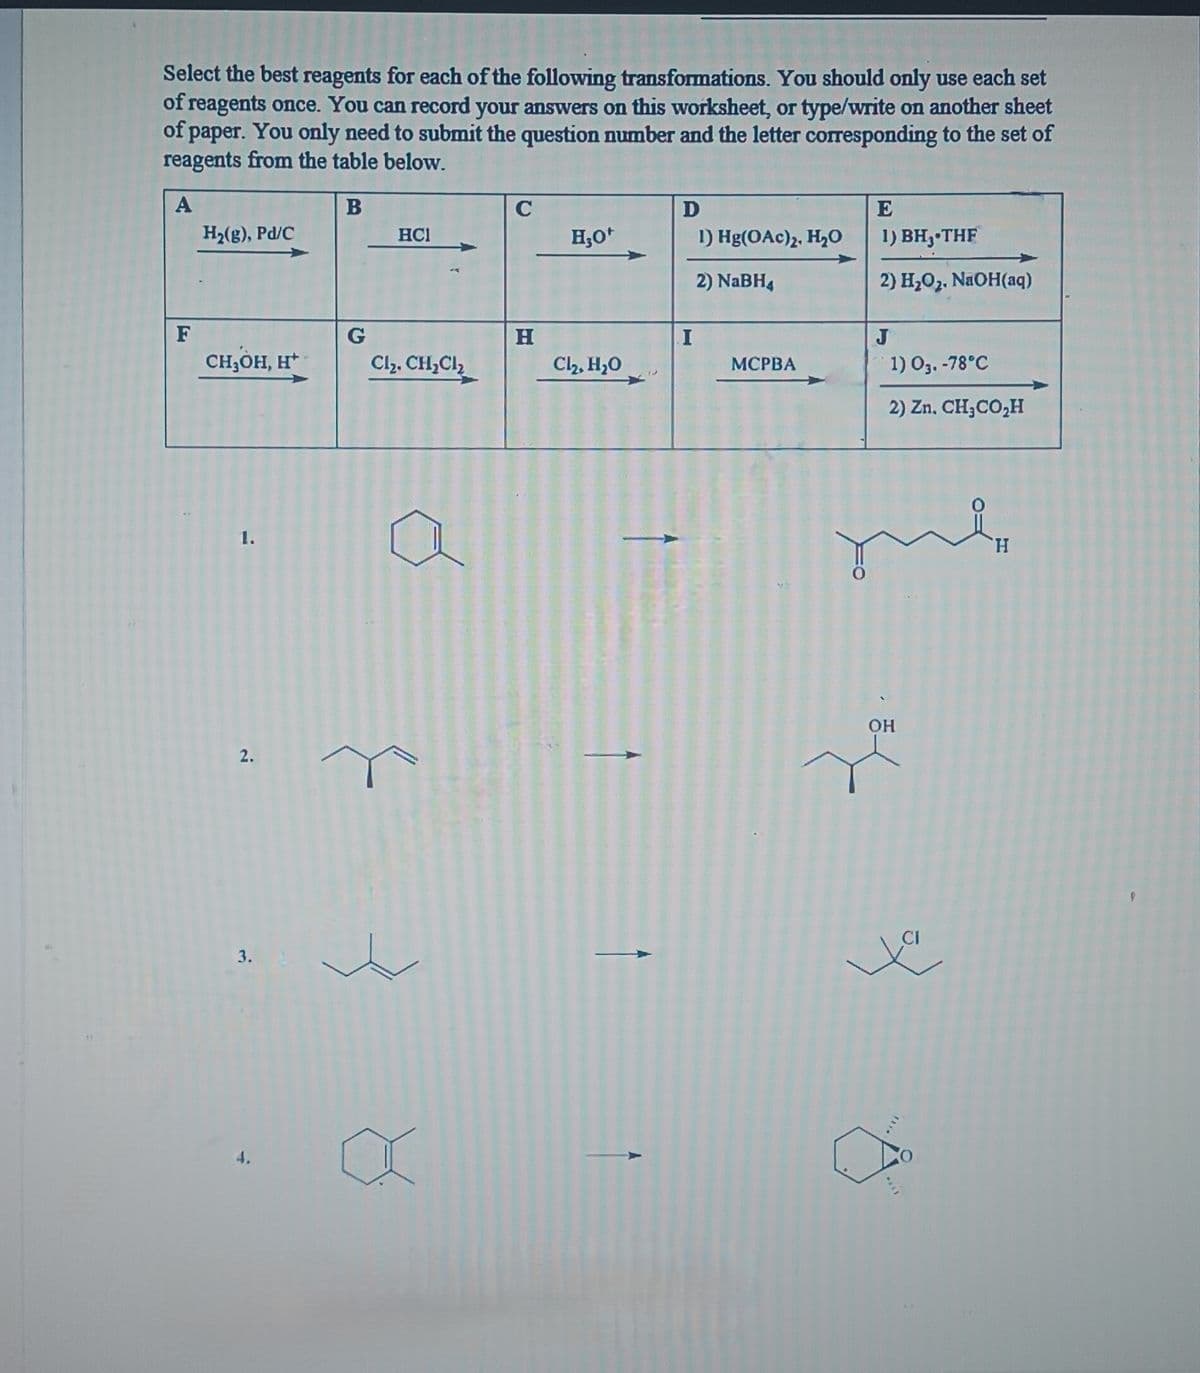 Select the best reagents for each of the following transformations. You should only use each set
of reagents once. You can record your answers on this worksheet, or type/write on another sheet
of paper. You only need to submit the question number and the letter corresponding to the set of
reagents from the table below.
A
B
F
H₂(g), Pd/C
CH₂OH, H+
1.
2.
3.
4.
G
HC1
Cl₂, CH₂Cl₂
C
H
H₂O*
Cl₂, H₂O
D
I
1) Hg(OAc)2, H₂O
2) NaBH4
MCPBA
E
1) BH, THF
2) H₂O₂. NaOH(aq)
J
1) 03.-78°C
2) Zn. CH₂CO₂H
OH
H